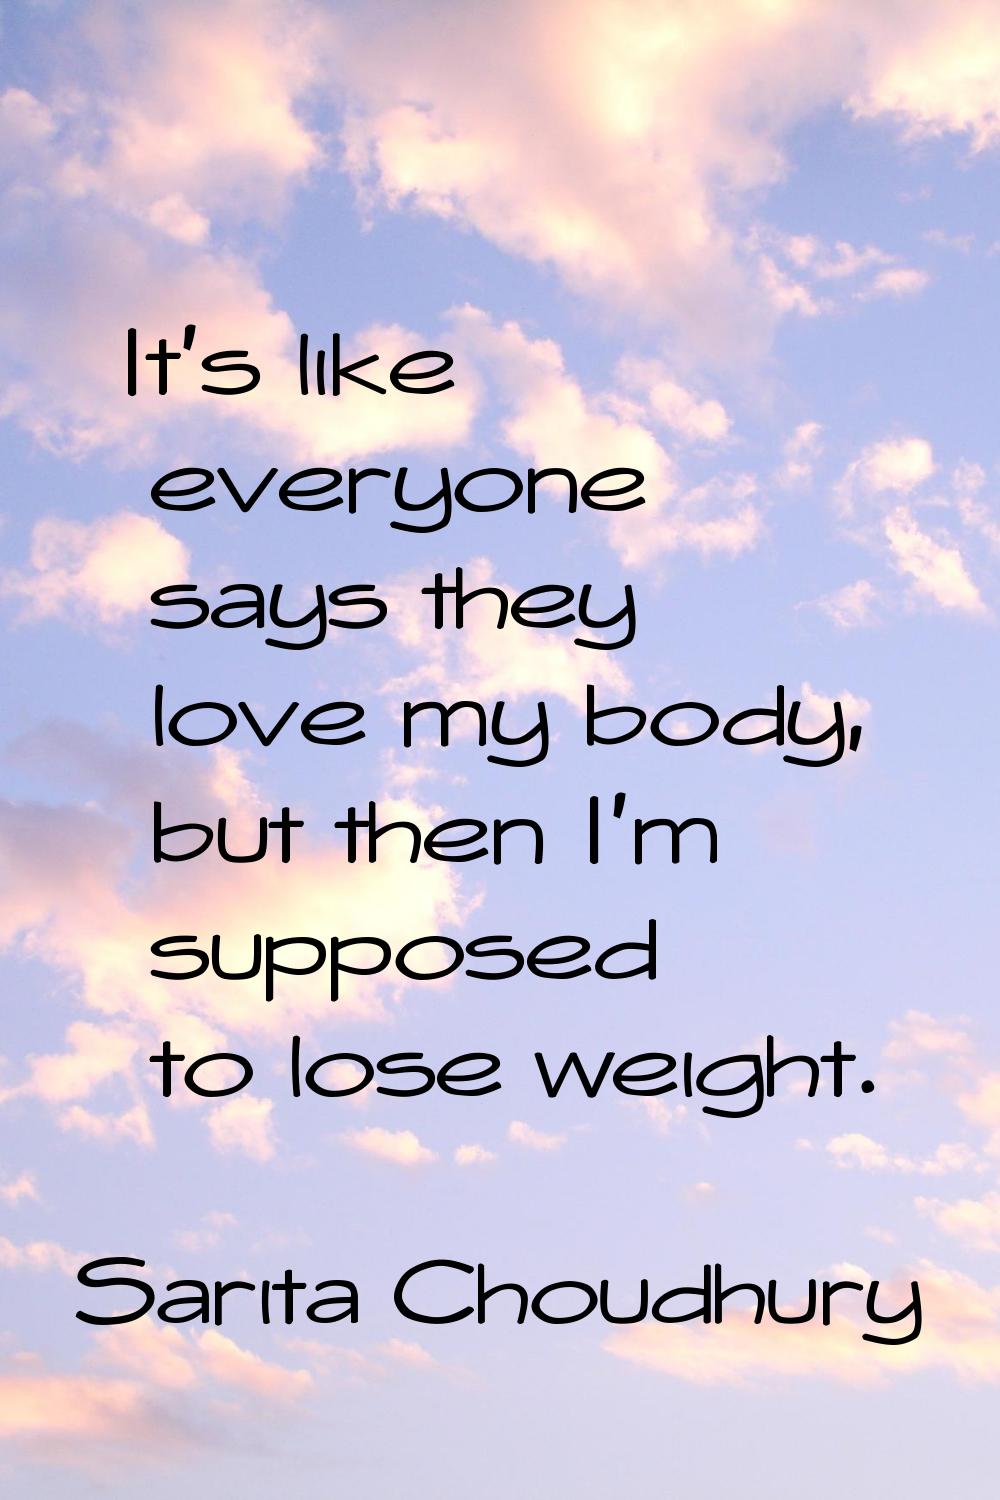 It's like everyone says they love my body, but then I'm supposed to lose weight.